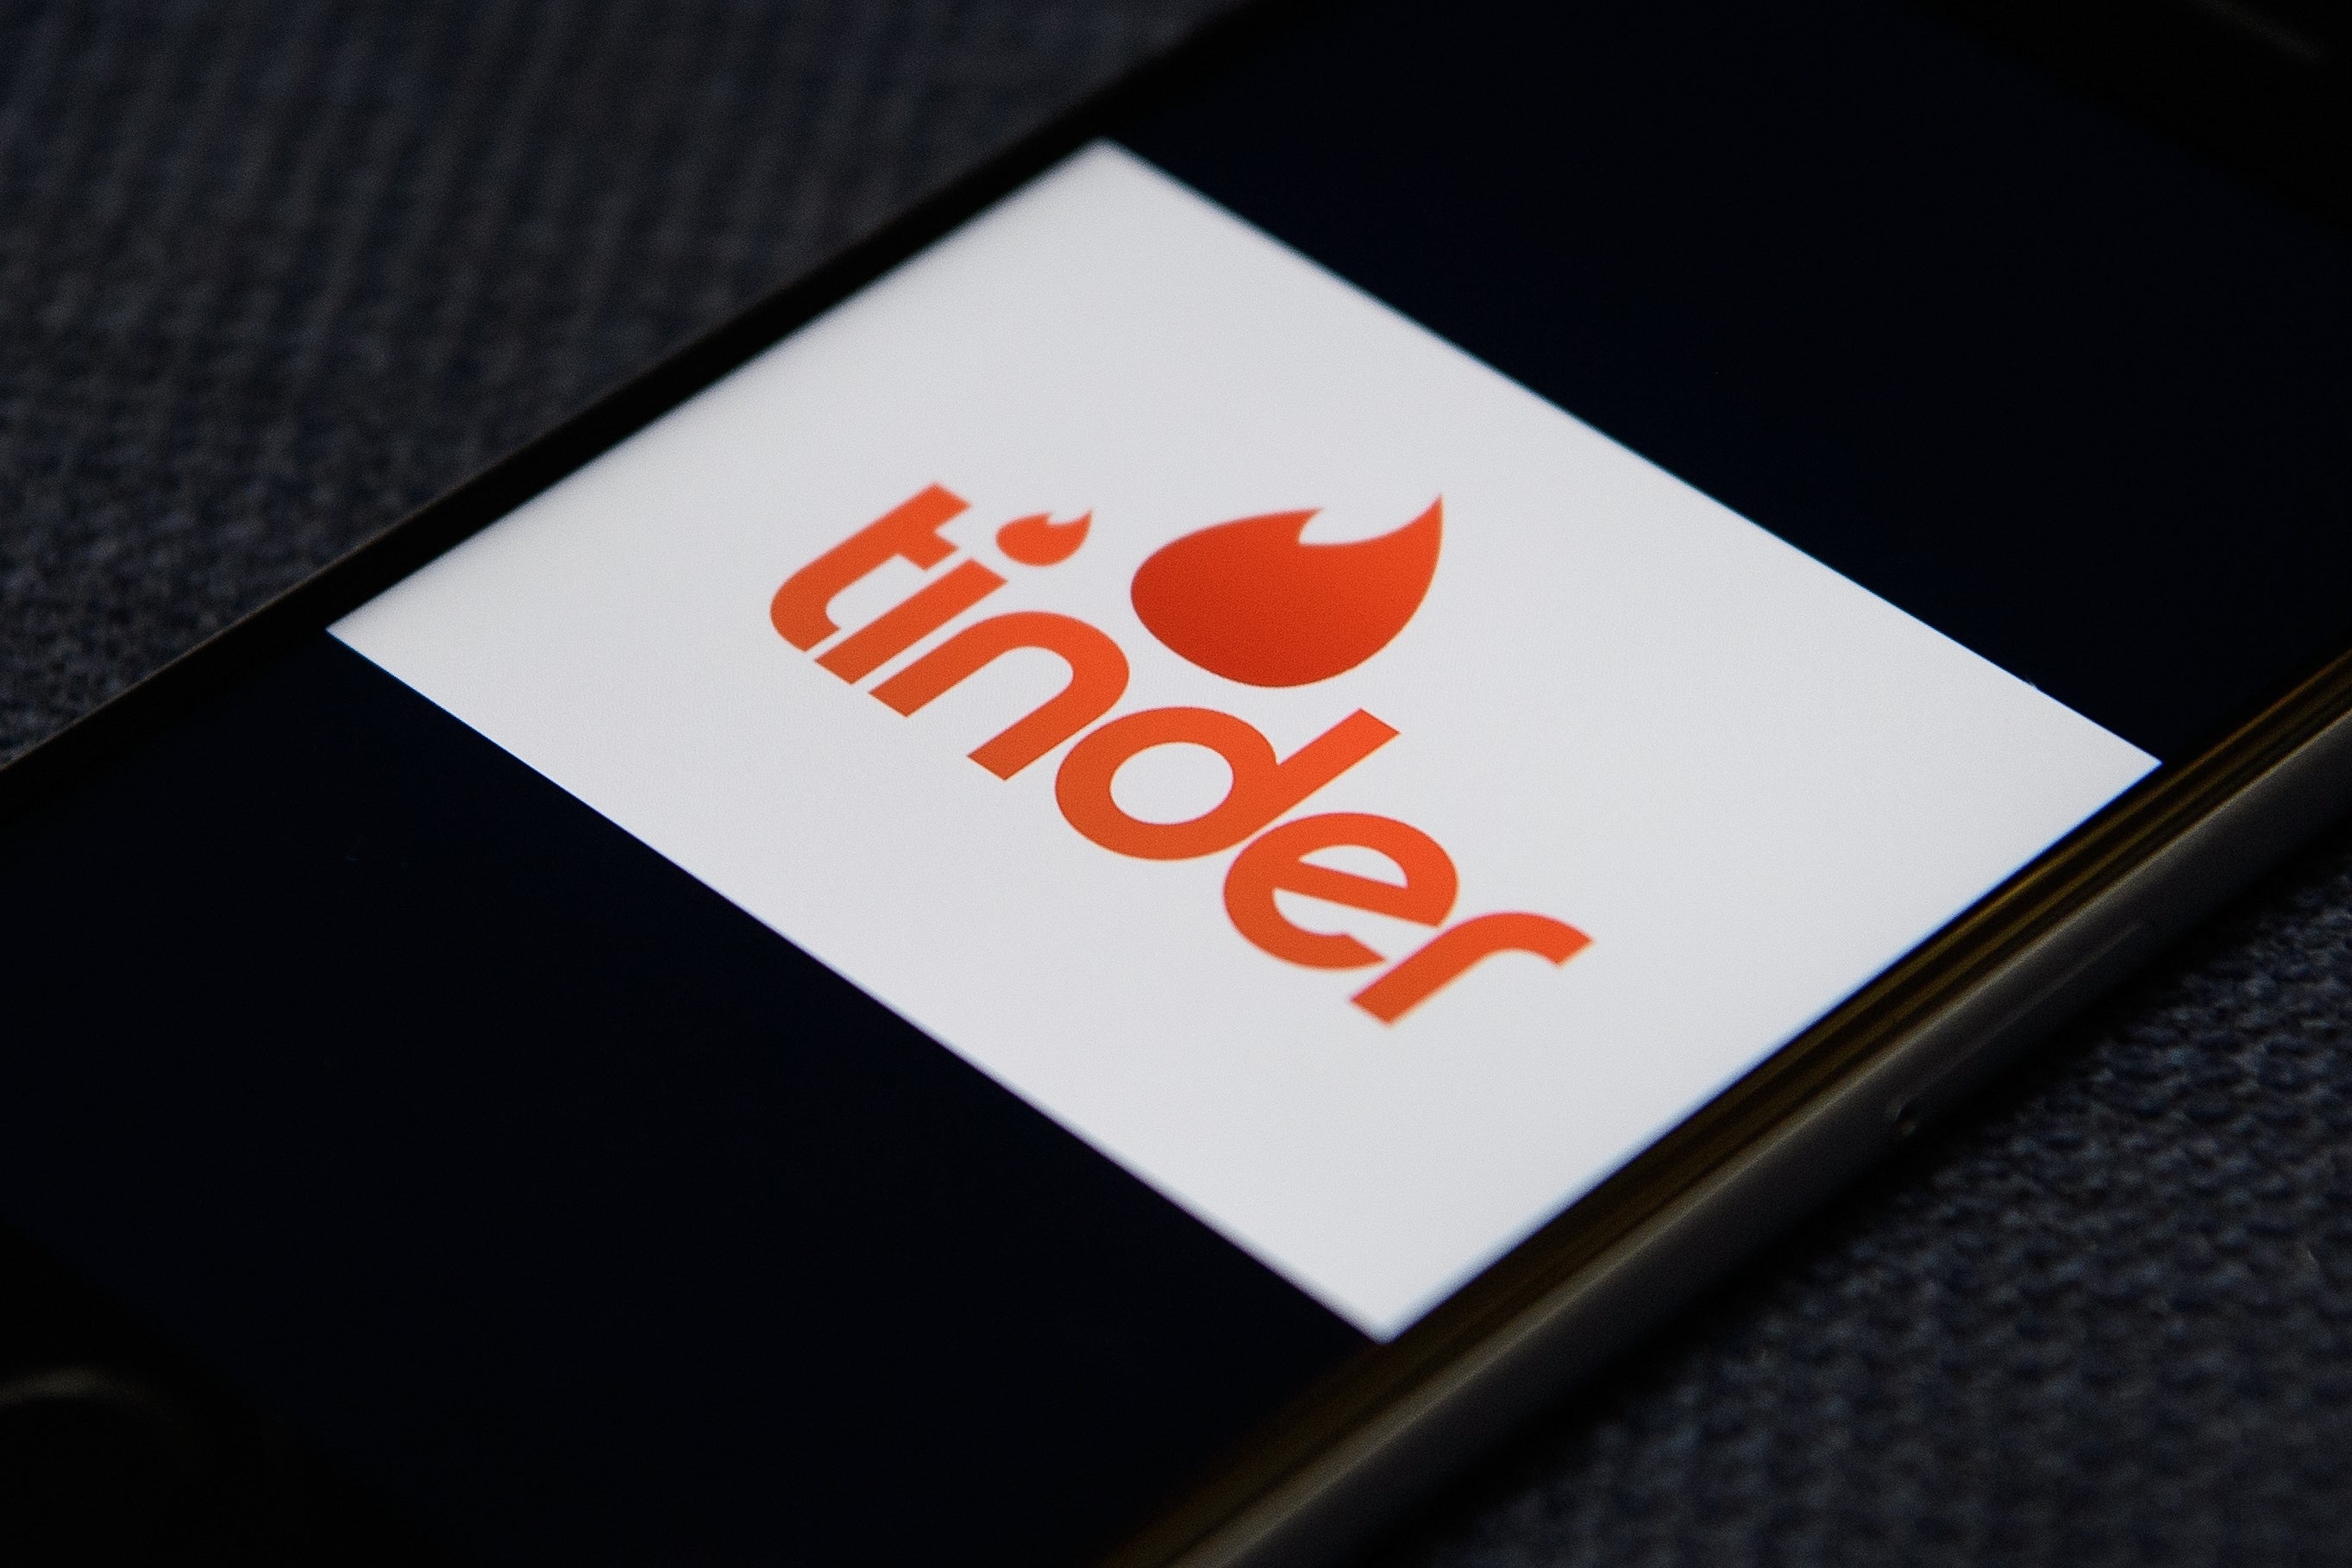 Tinder publishes 2020 Year in Swipe report